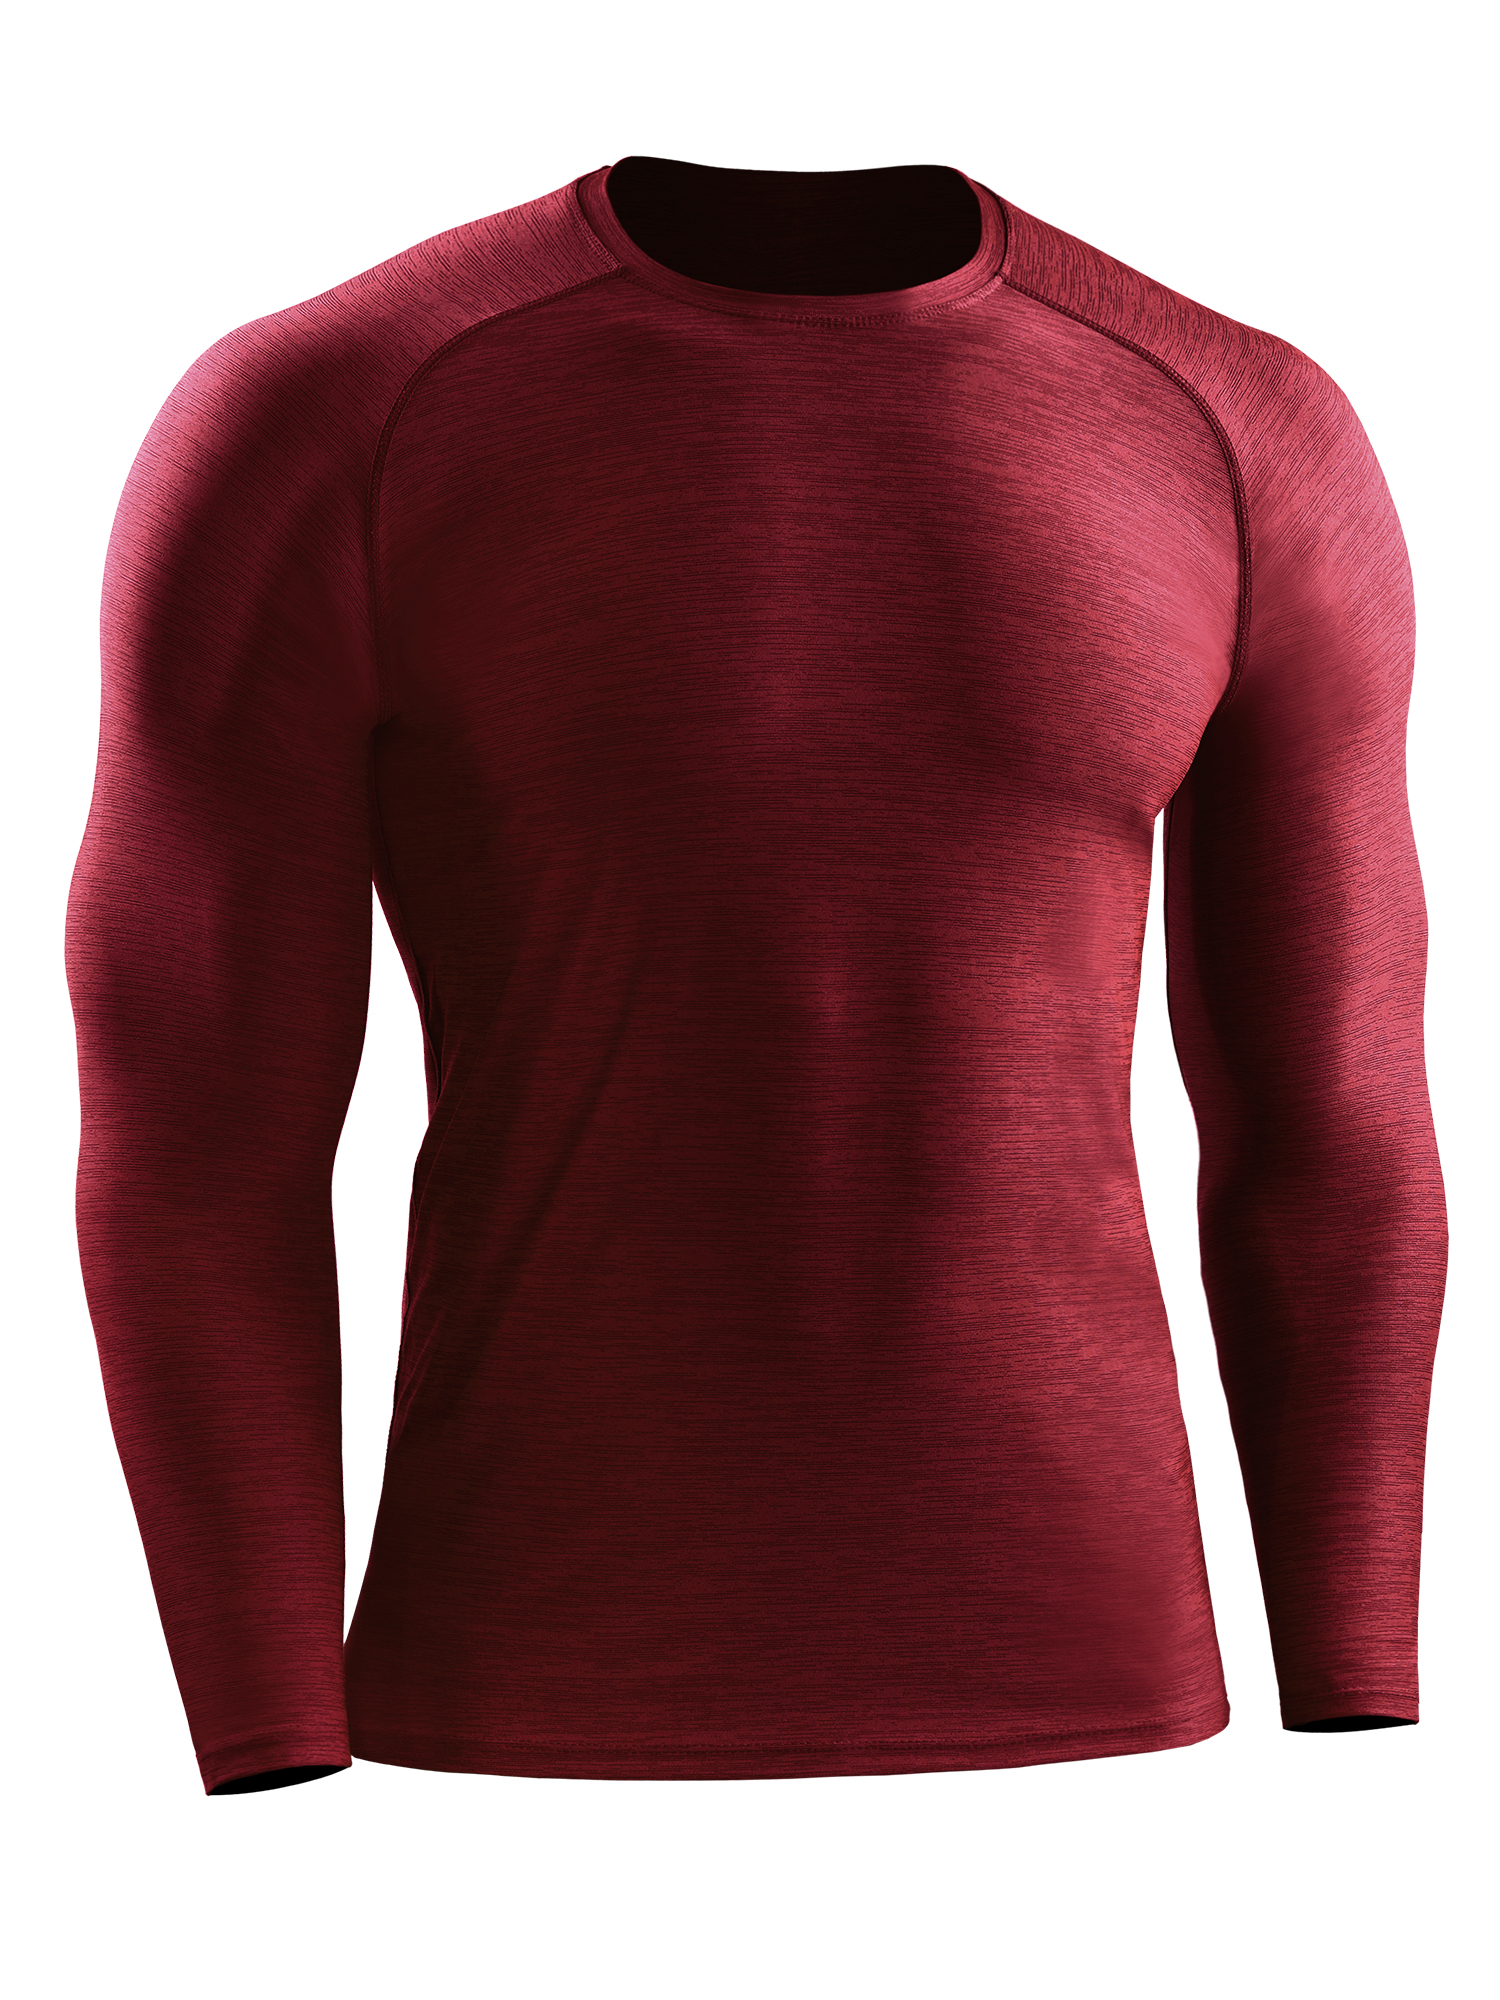 Mens Long Sleeves Top Shirt Compression Base Layer Thermal Sport Gym Tee Fitness